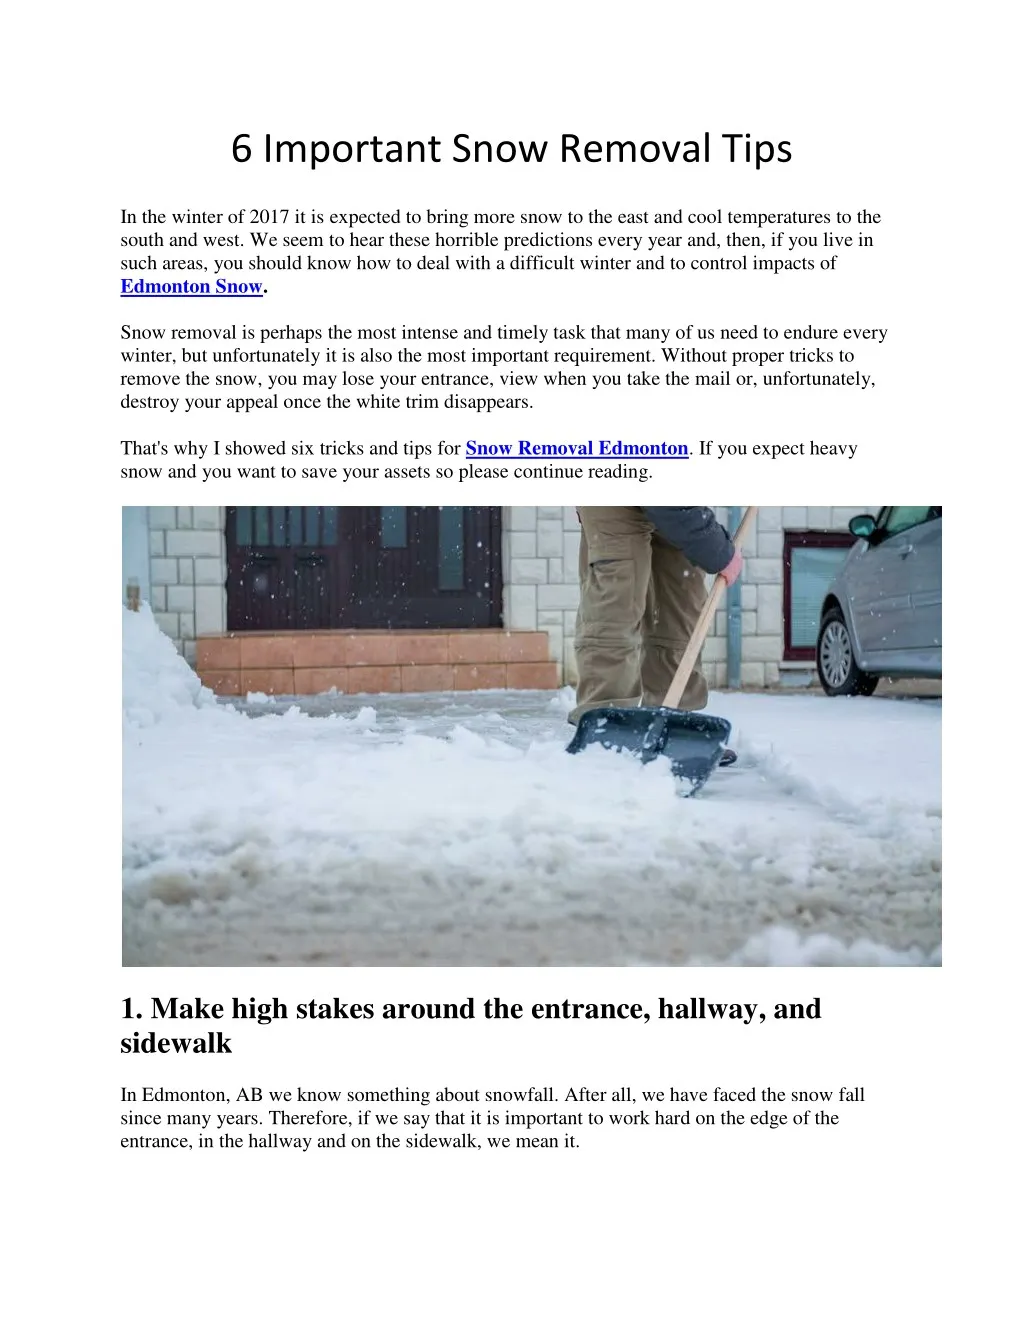 6 important snow removal tips